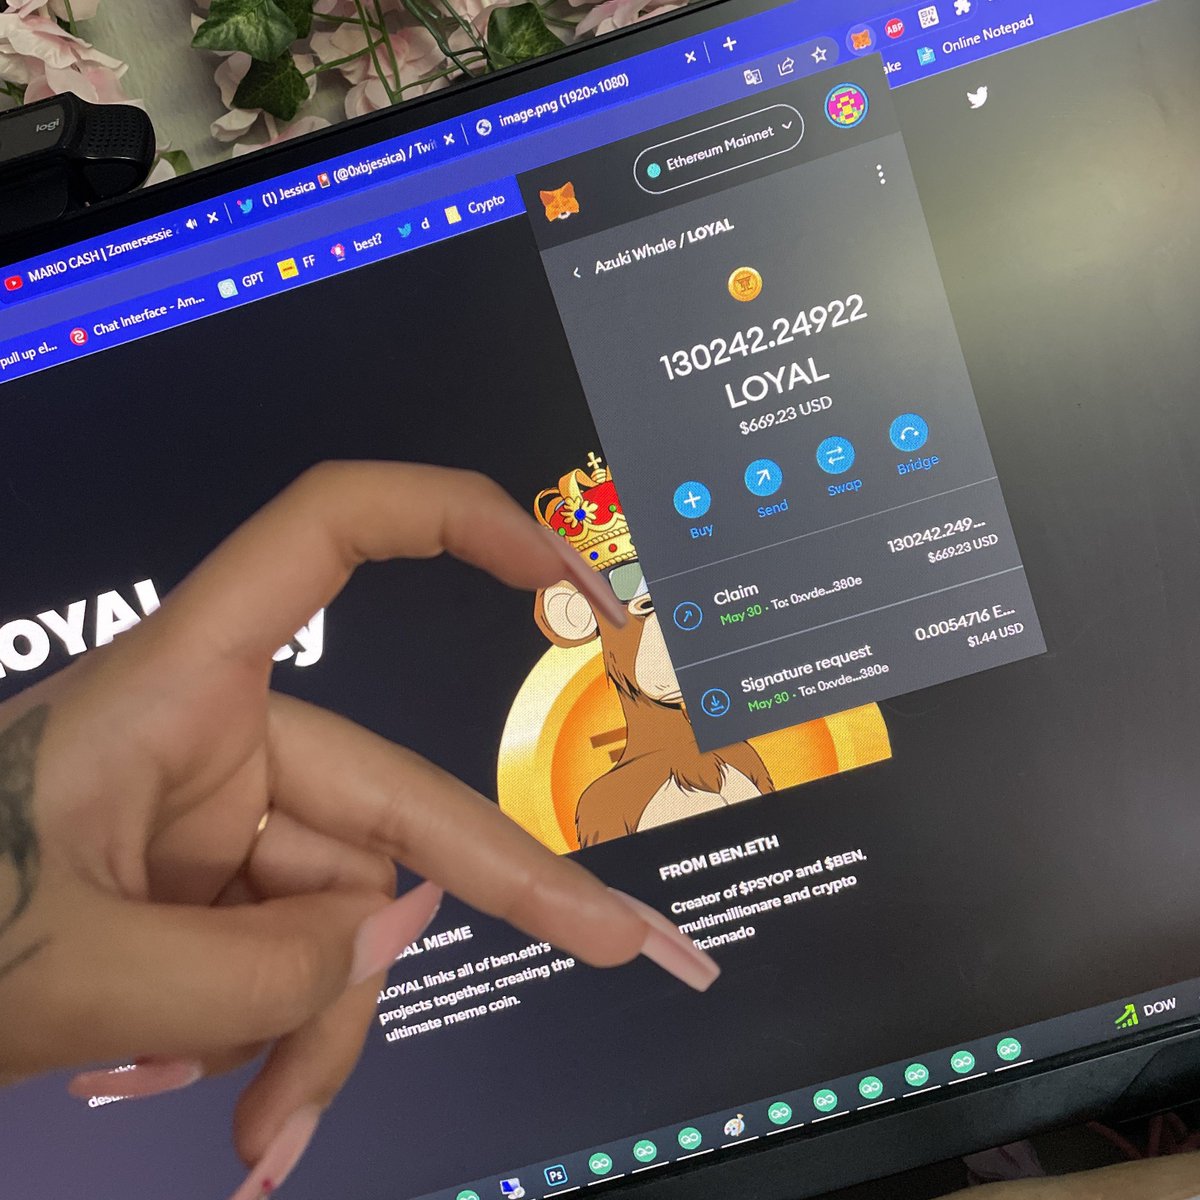 omg i just claimed $670 from the $LOYAL airdrop? claim now 👇

🔗 loyalty.holdings 🎁

$WAGMI $MATIC $CAW $SHIB $FLOKI $DAVE $PSYOP $BEN #USDT $BTC $ADA #crypto #WOJAK #MATIC BTC and ETH $HABIBI $BIAO #BAYC #NFTs $HEX #SEC #ETH #altcoins $LINK $DOGE $XRP $PEPE $MONG $BOB